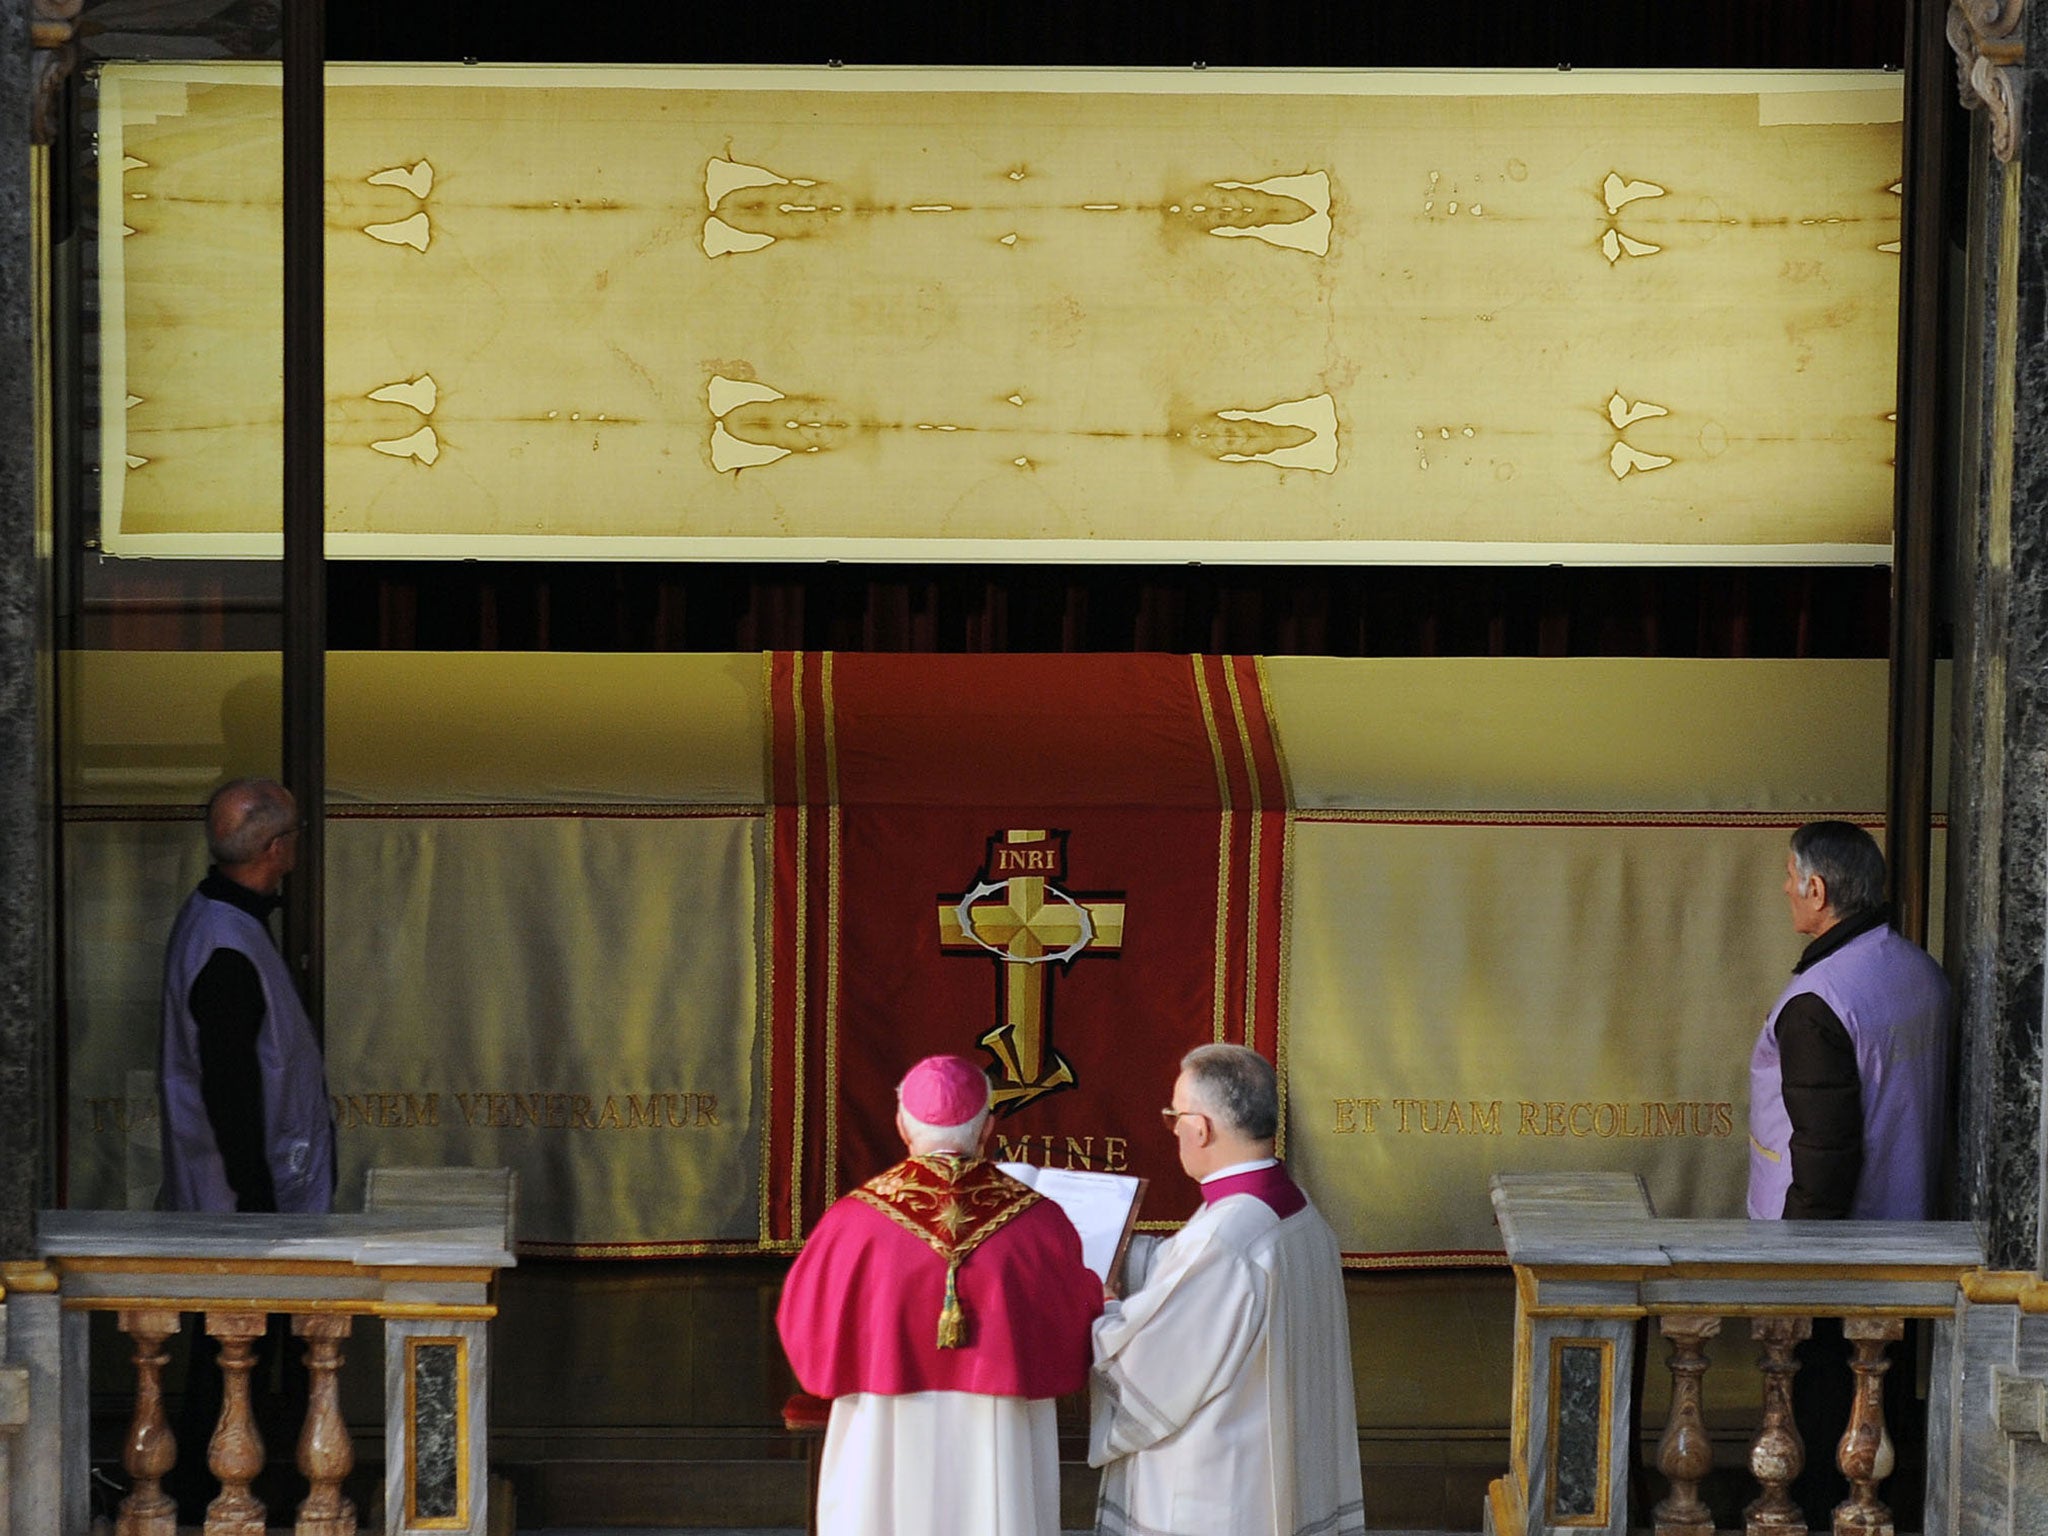 The Shroud of Turin is currently displayed at St John the Baptist Cathedral in Turin